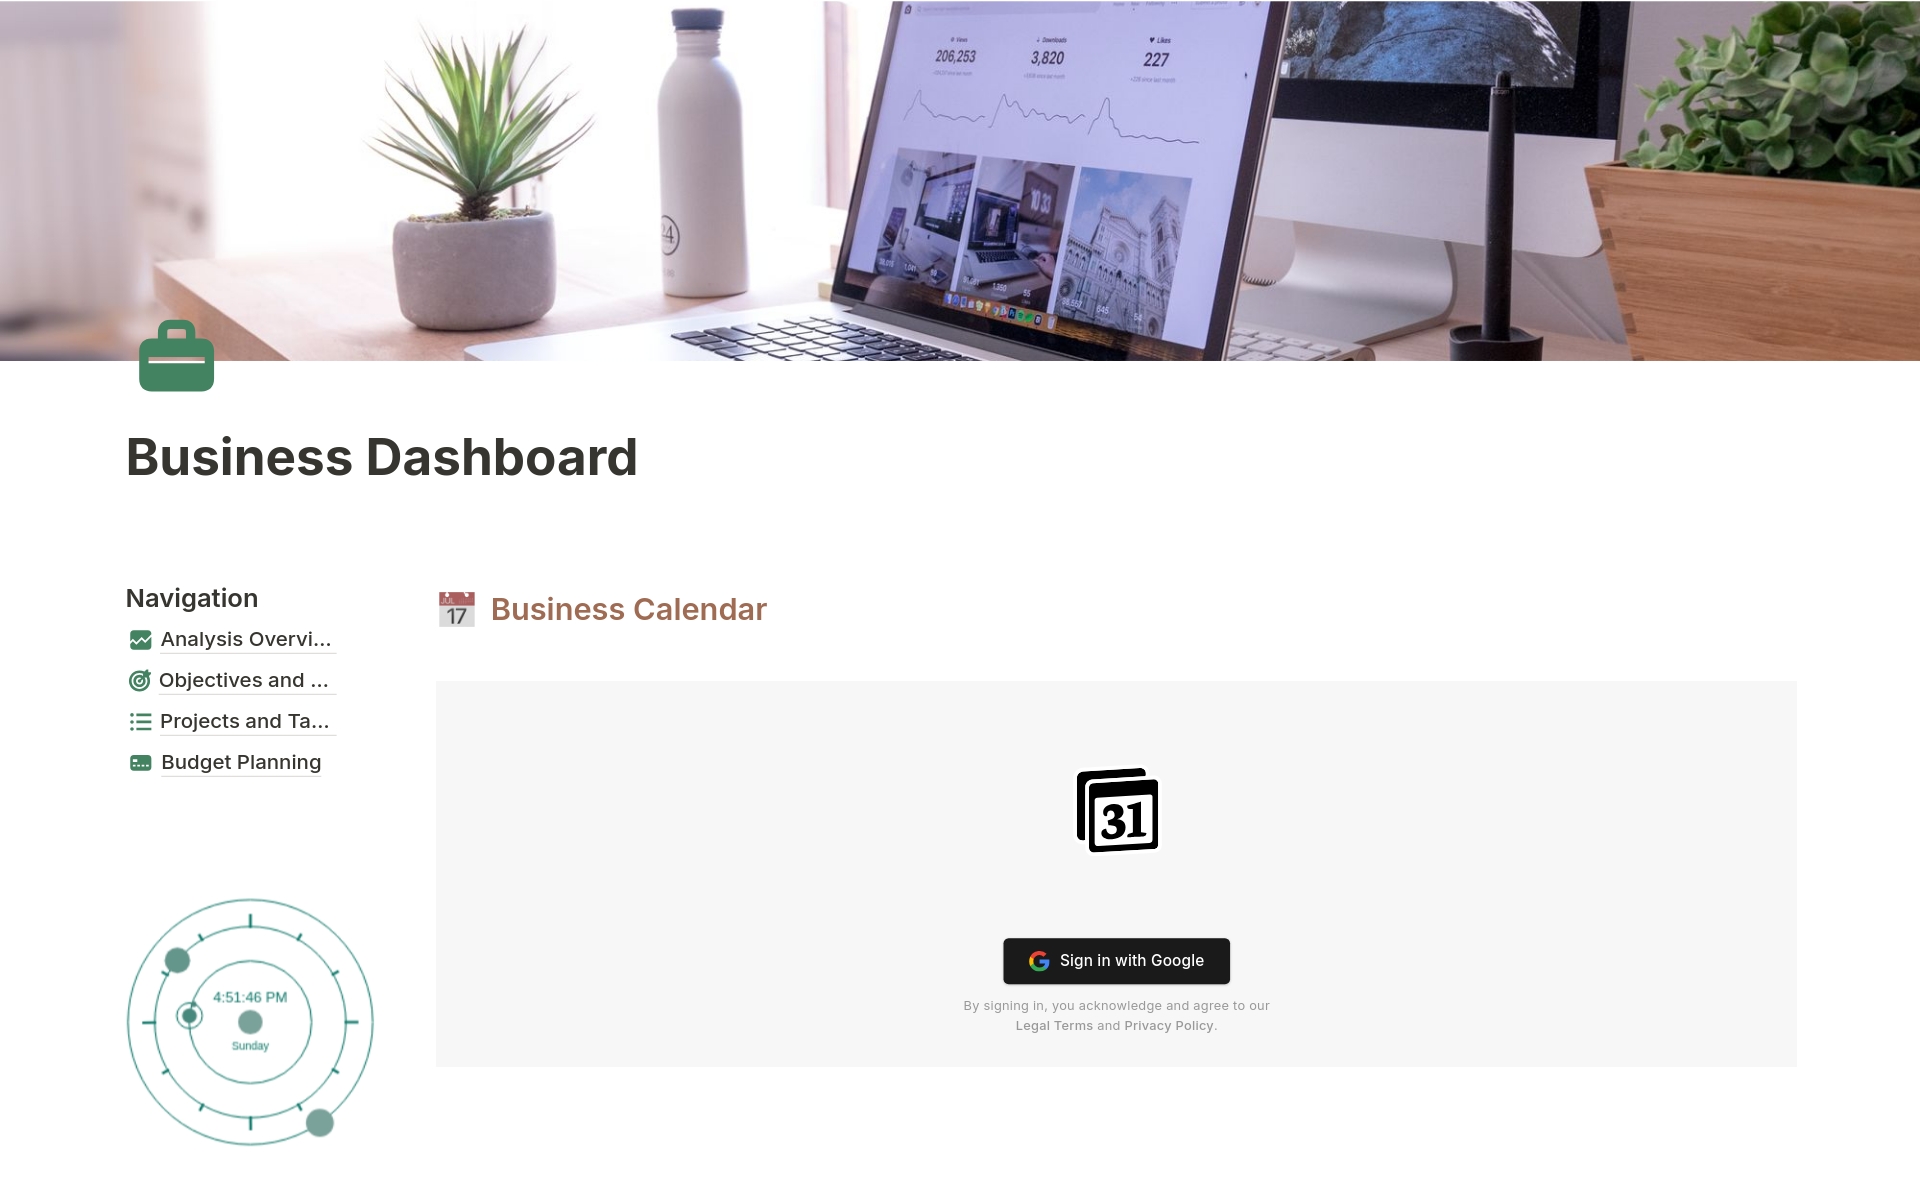 Business Dashboard keeps track of your business vision, goals, projects and helps you to monitor your expenses and sales.